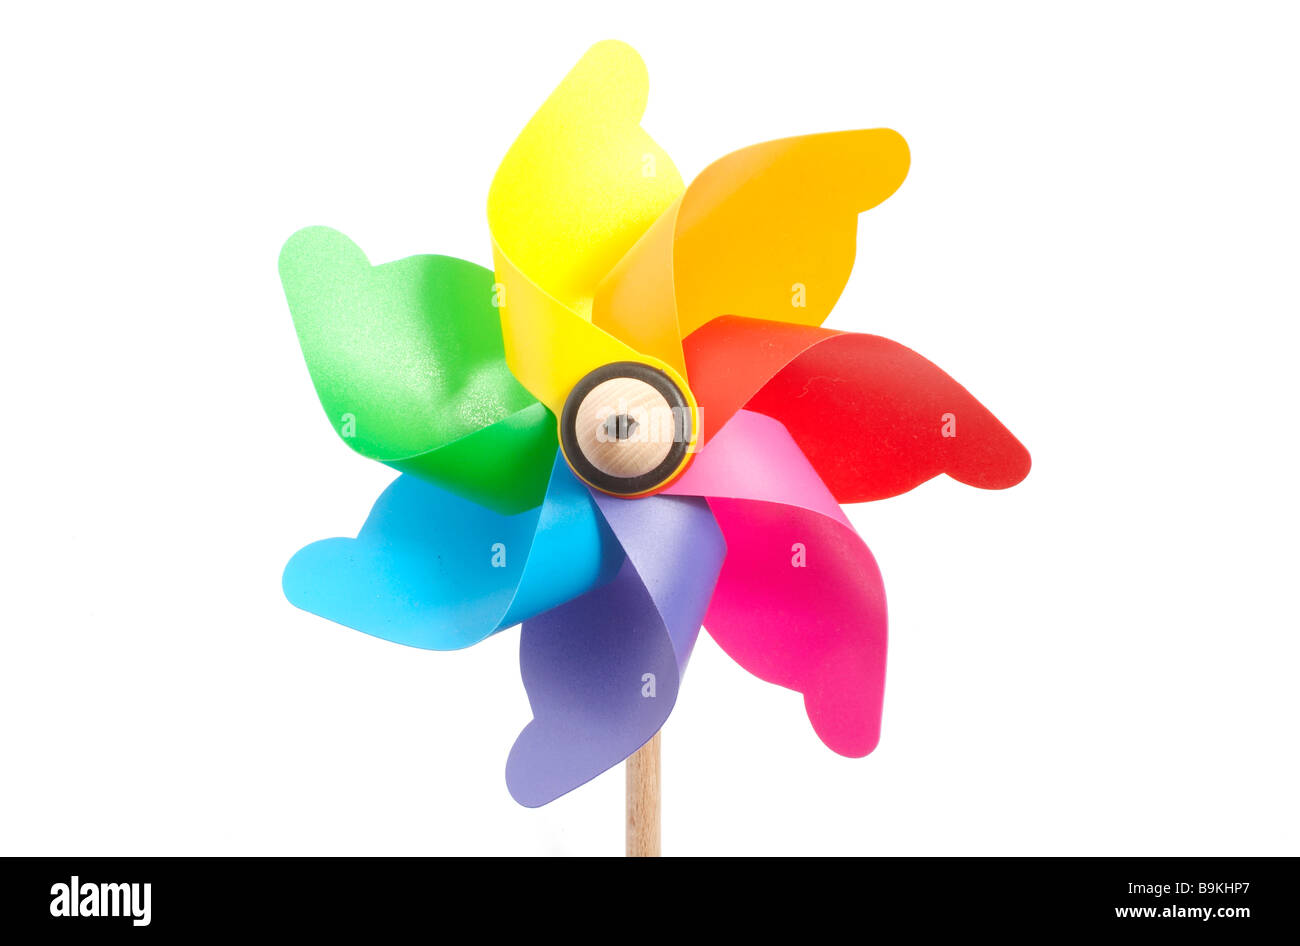 Stock Photography of a Colorful Child's Windmill Toy Stock Photo